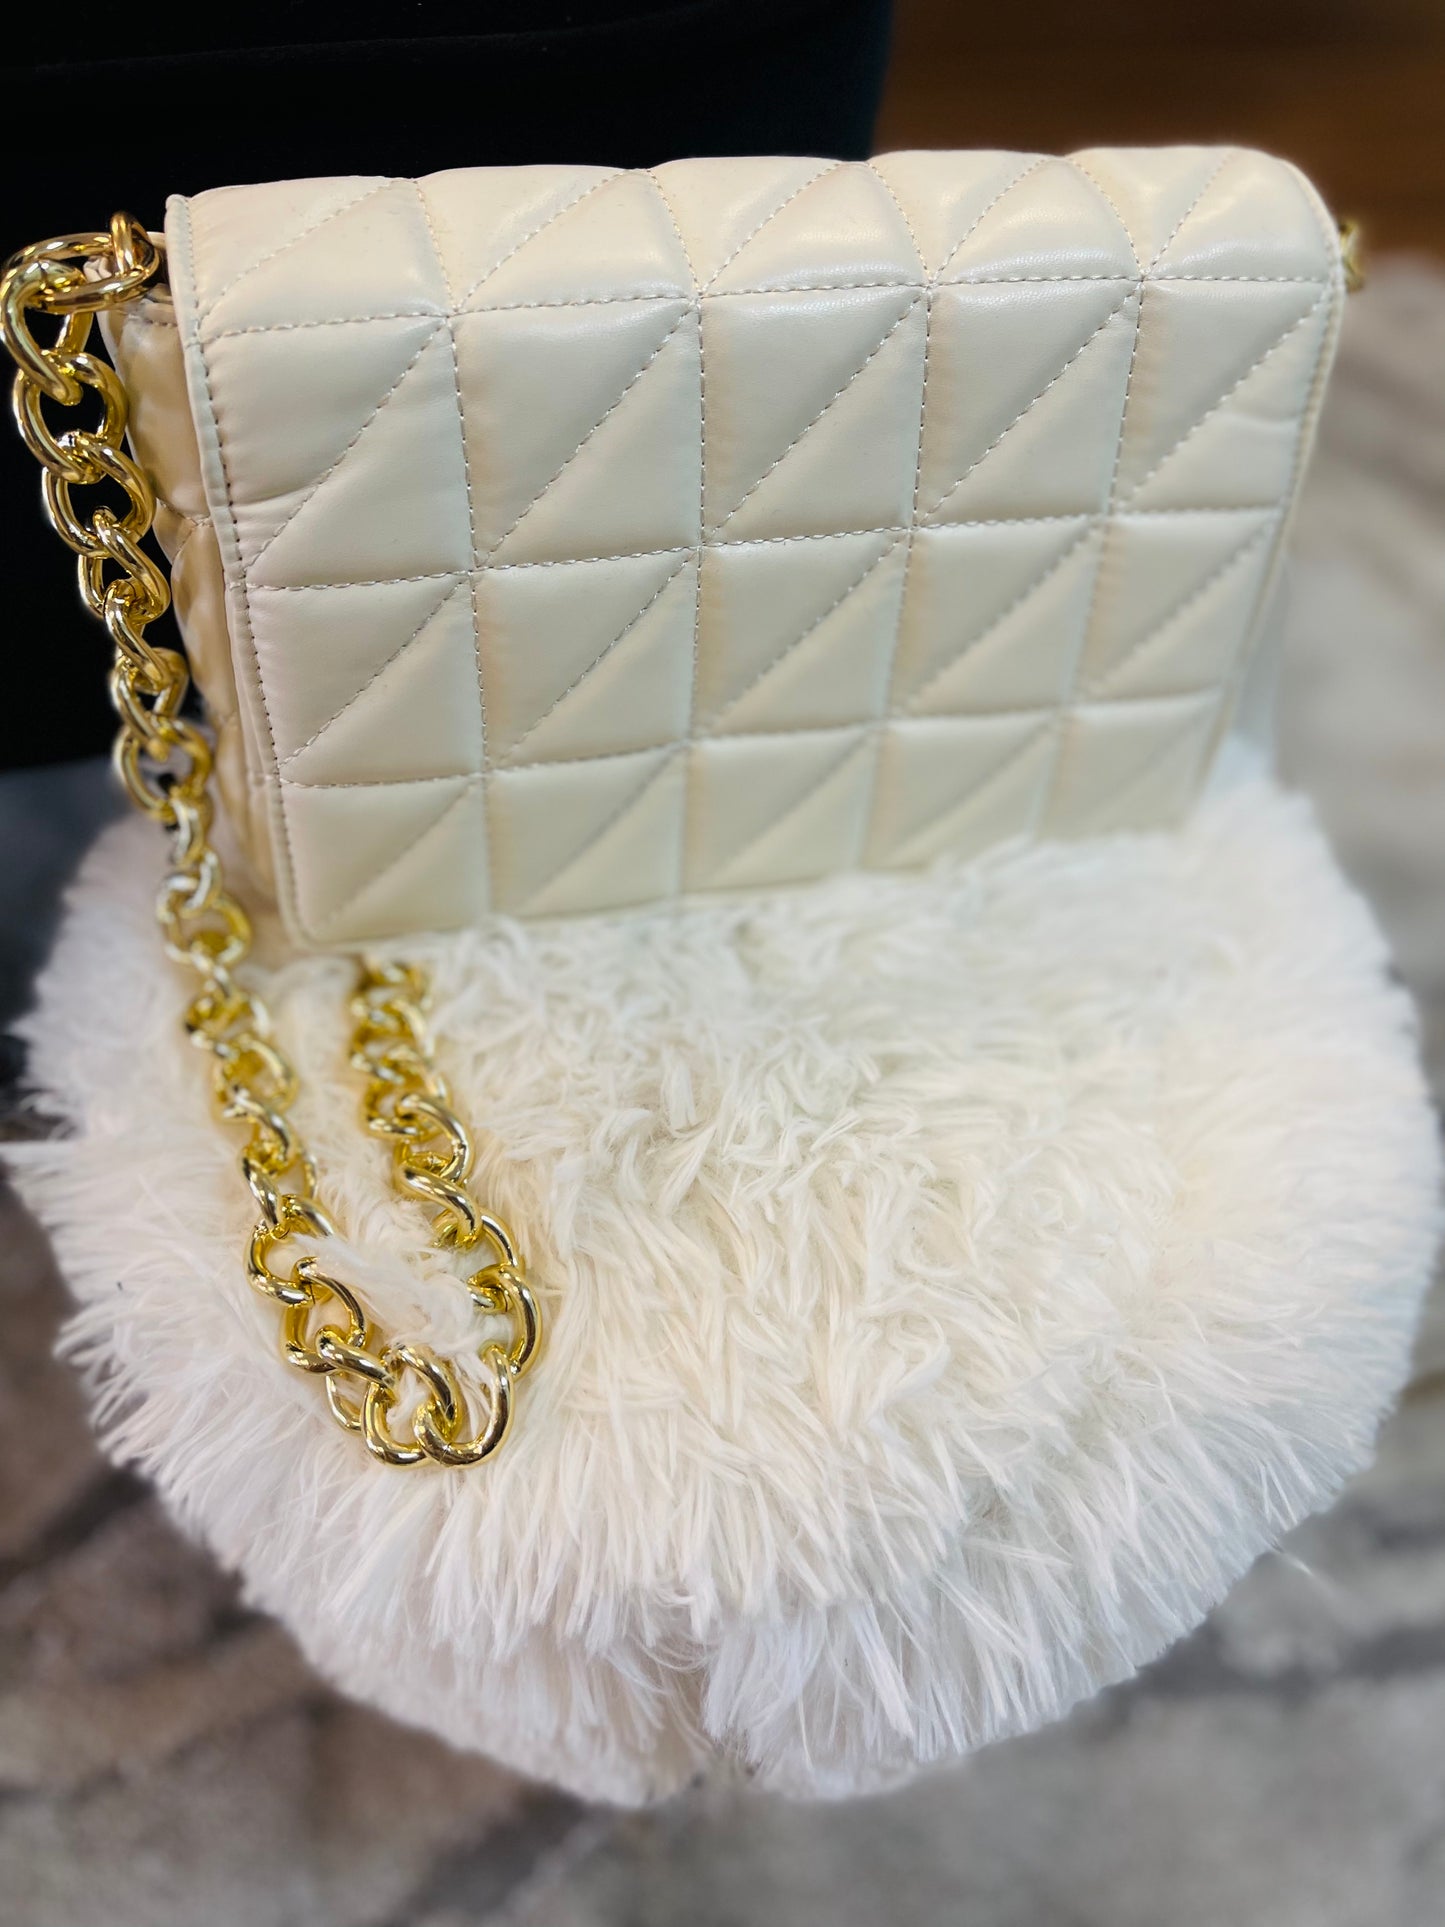 Chic Quilted Handbag